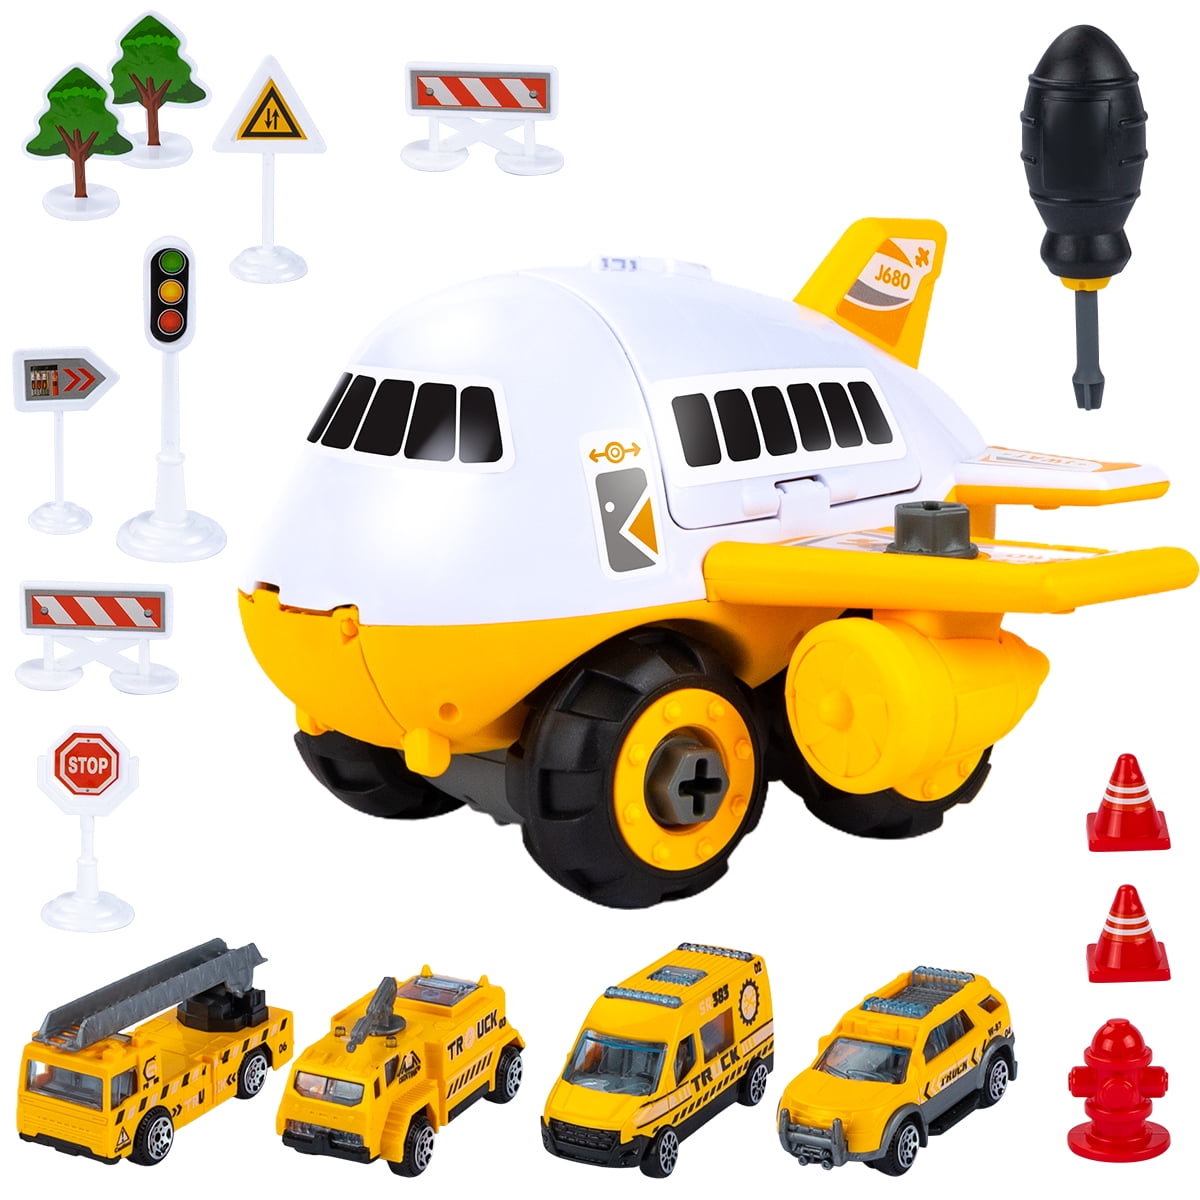 Details about   8 White Rubber fat TIRES 3/4" od plus size TOY car truck airplane & BONUS